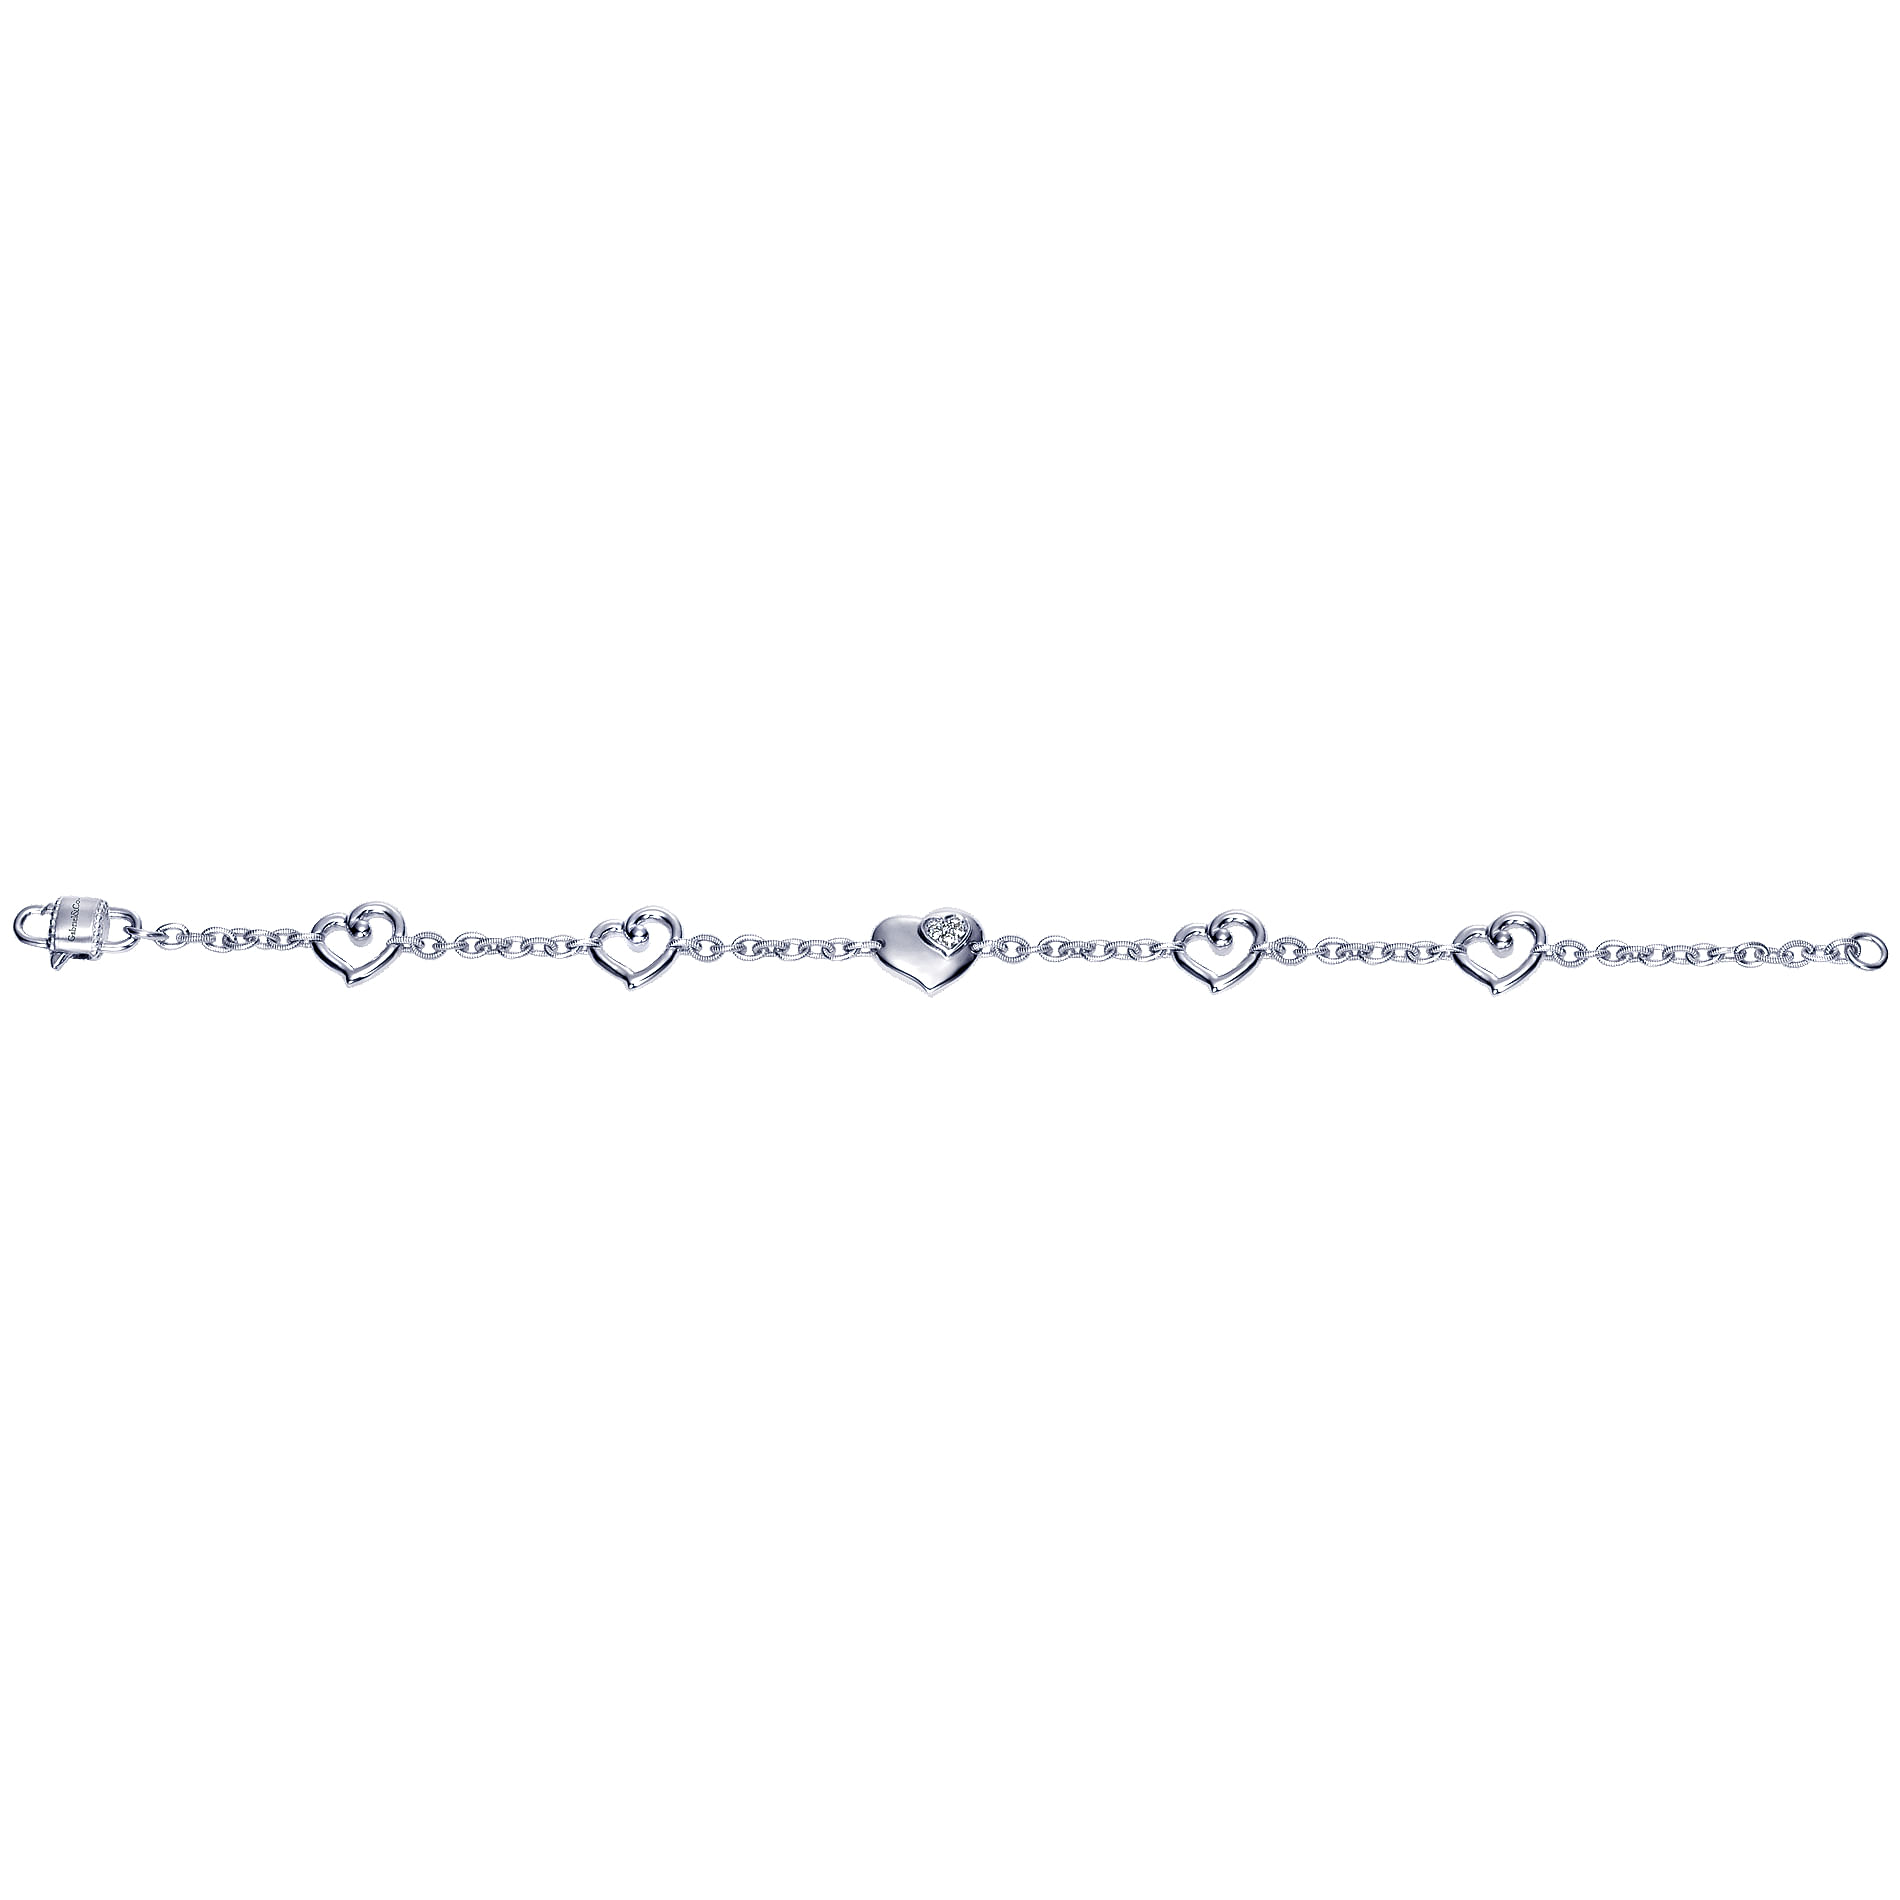 925 Sterling Silver Heart Chain Bracelet with White Sapphire Accent